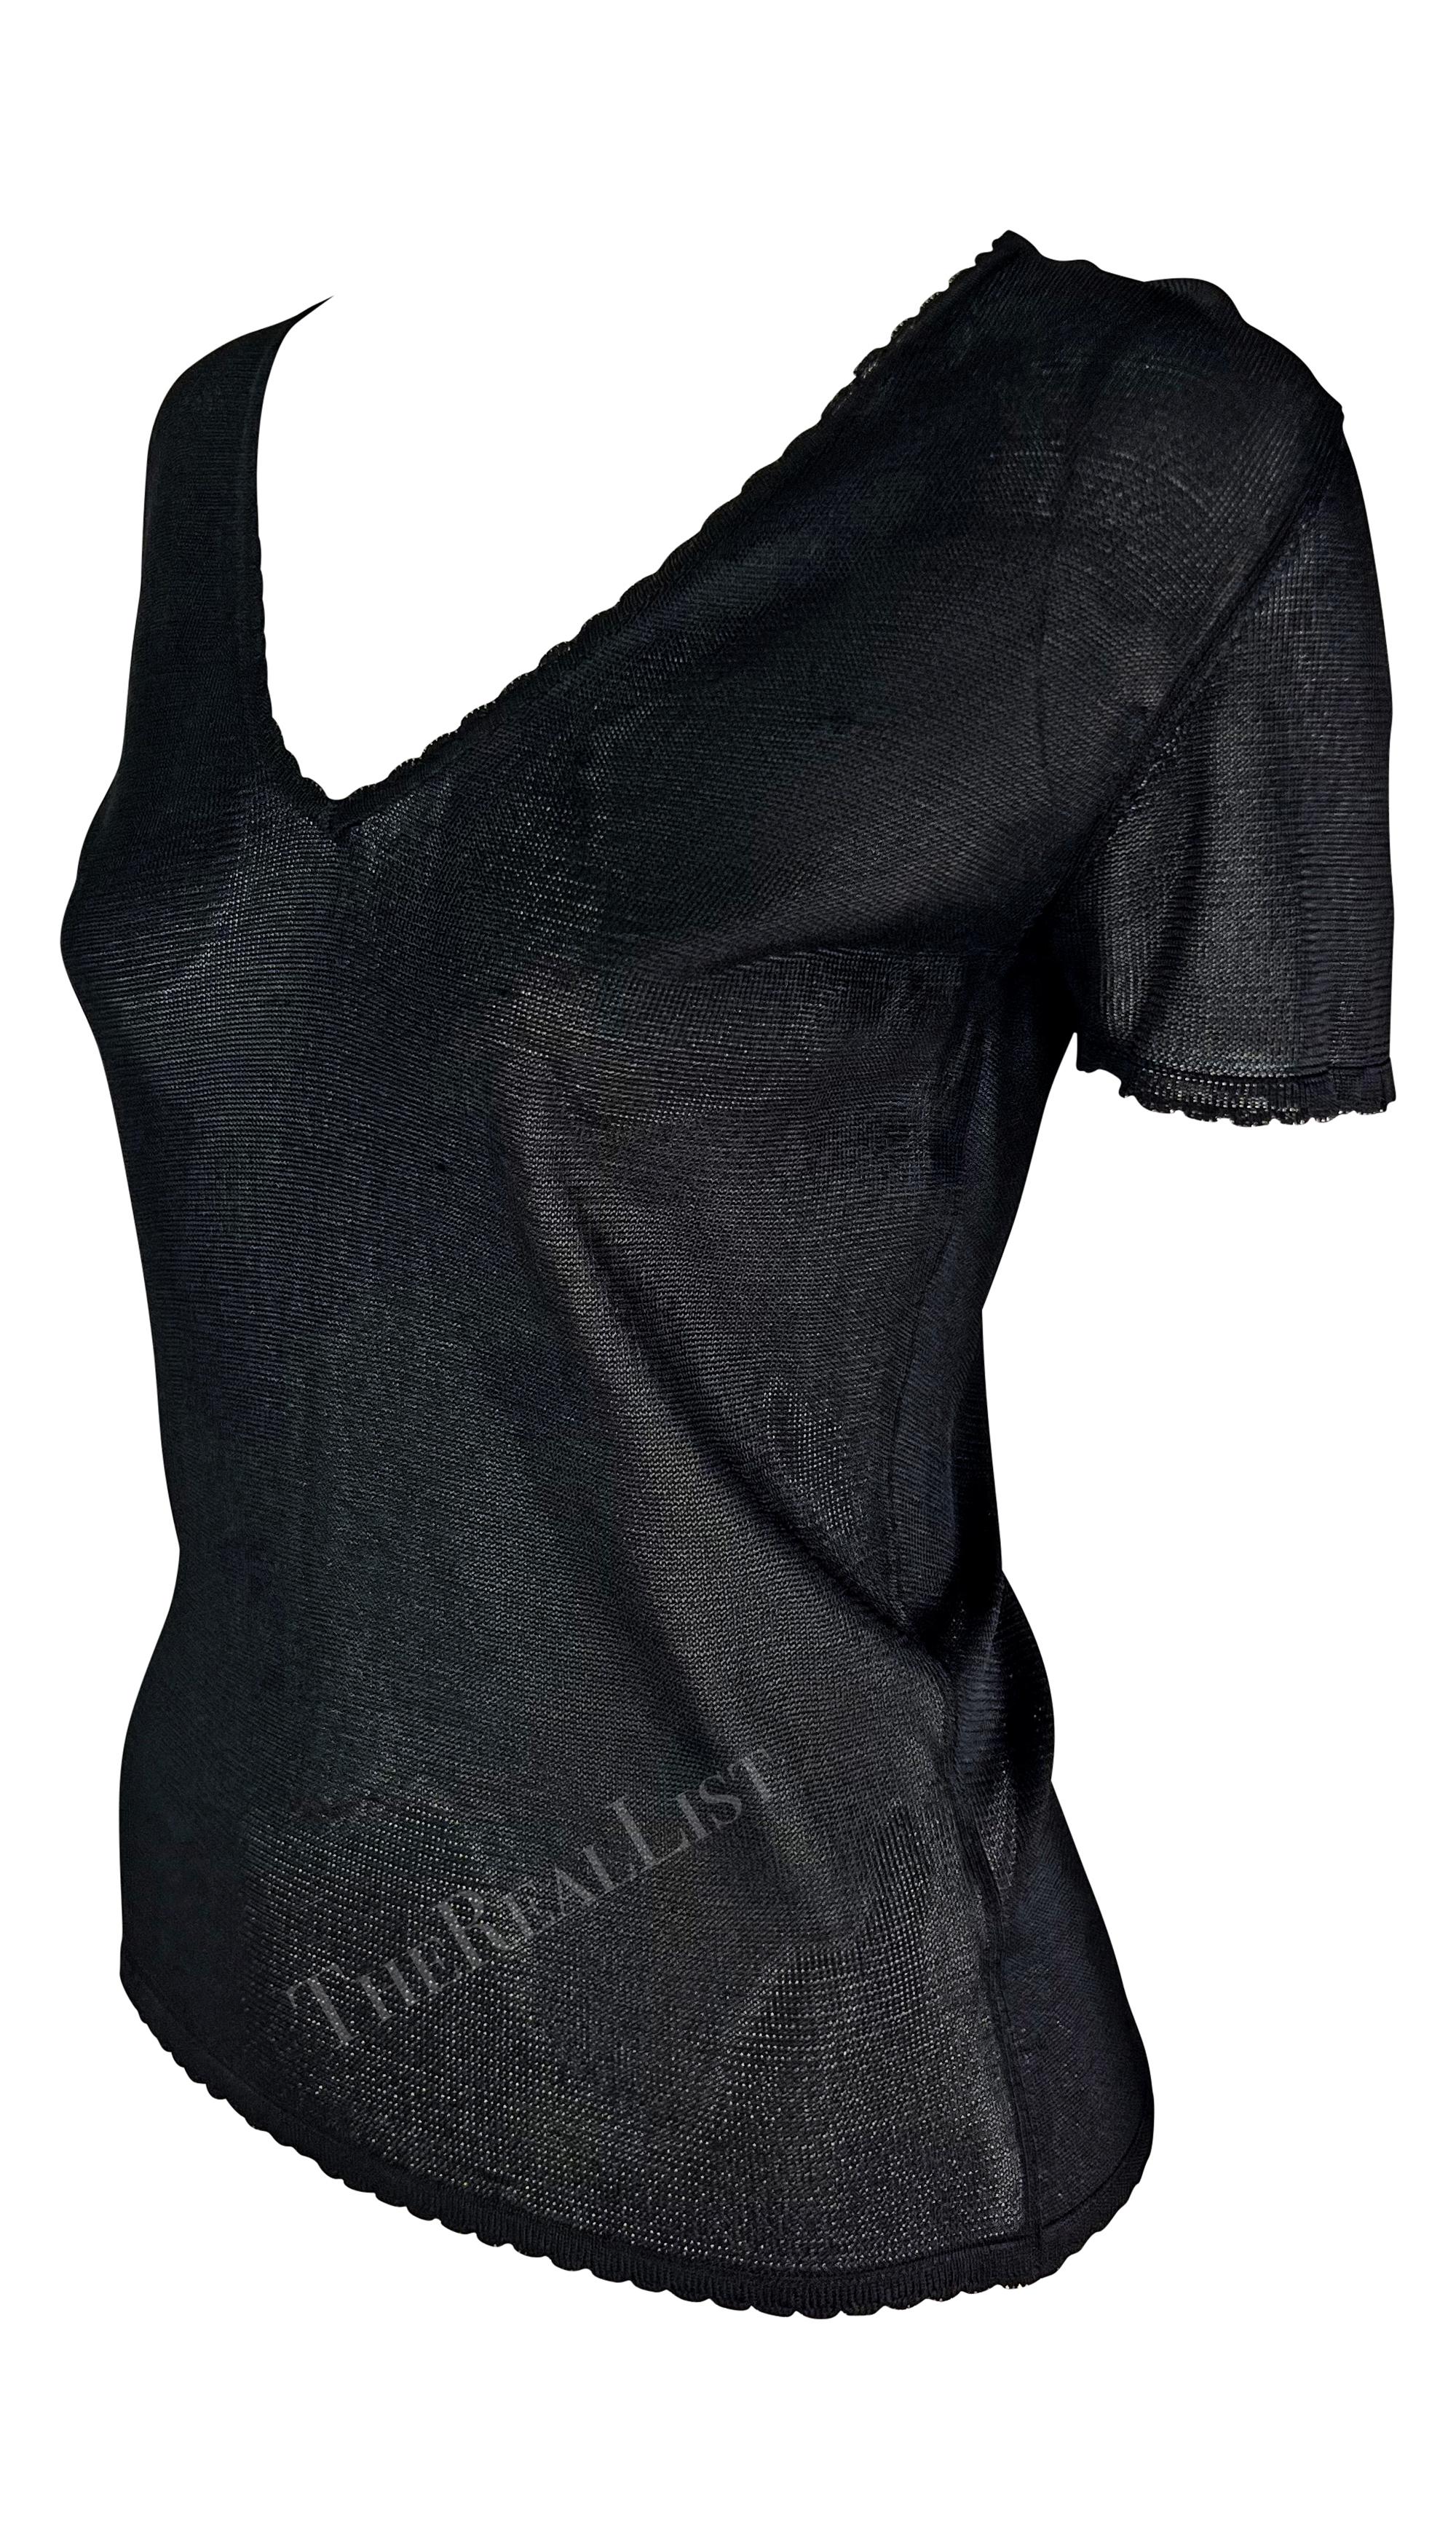 S/S 1997 Gianni Versace Scallop Knit Sheer Viscose V-Neck Black Sweater Top For Sale 1